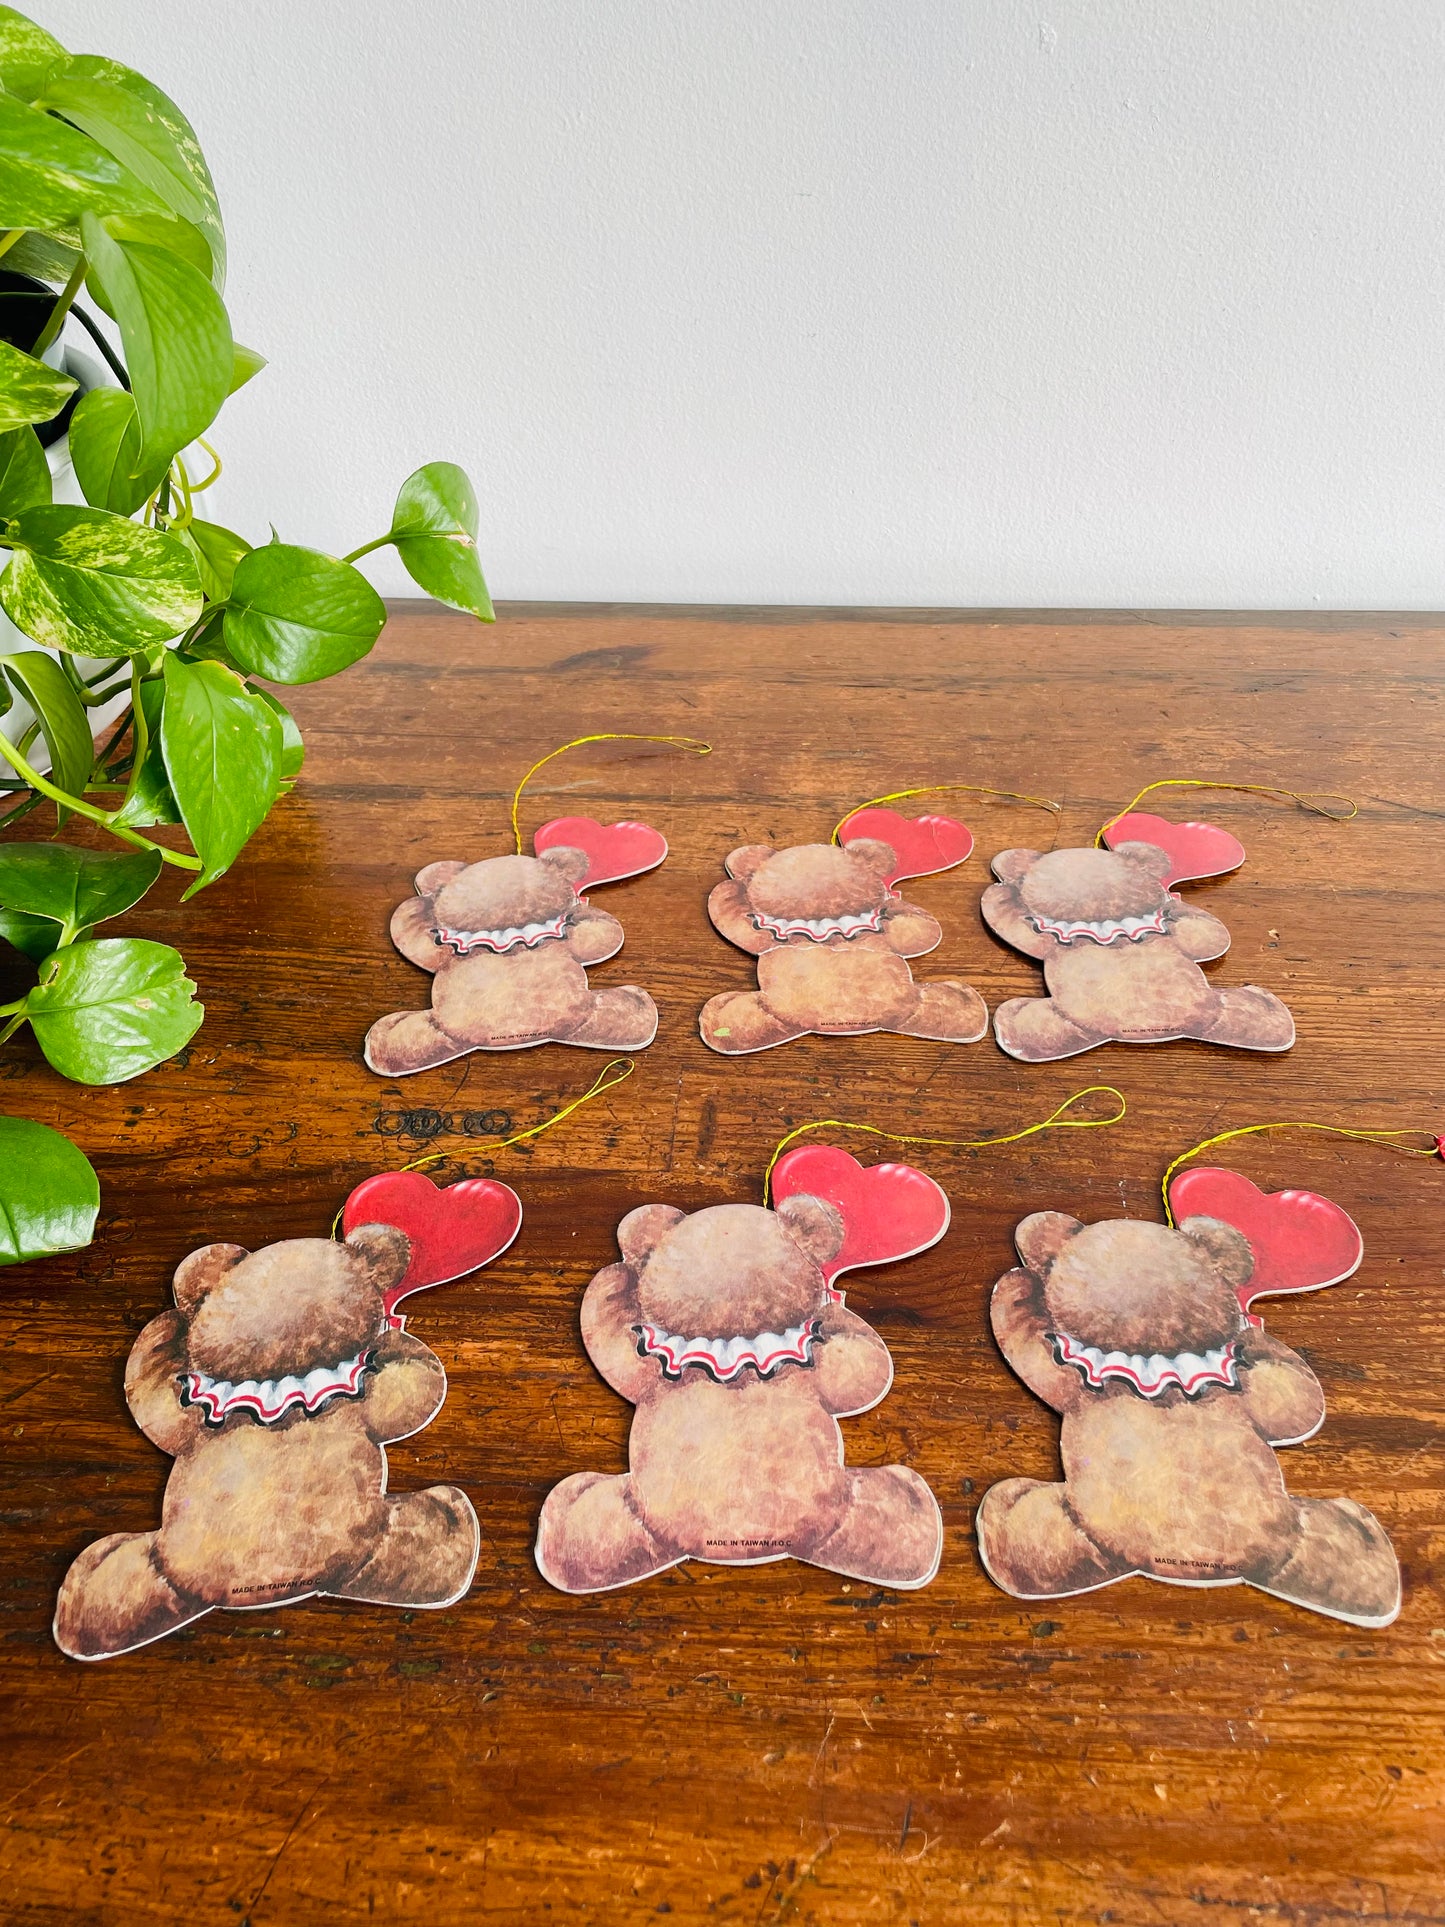 Adorable Cardboard Tags with Teddy Bears Holding Heart Balloons - Made in Taiwan - Set of 6